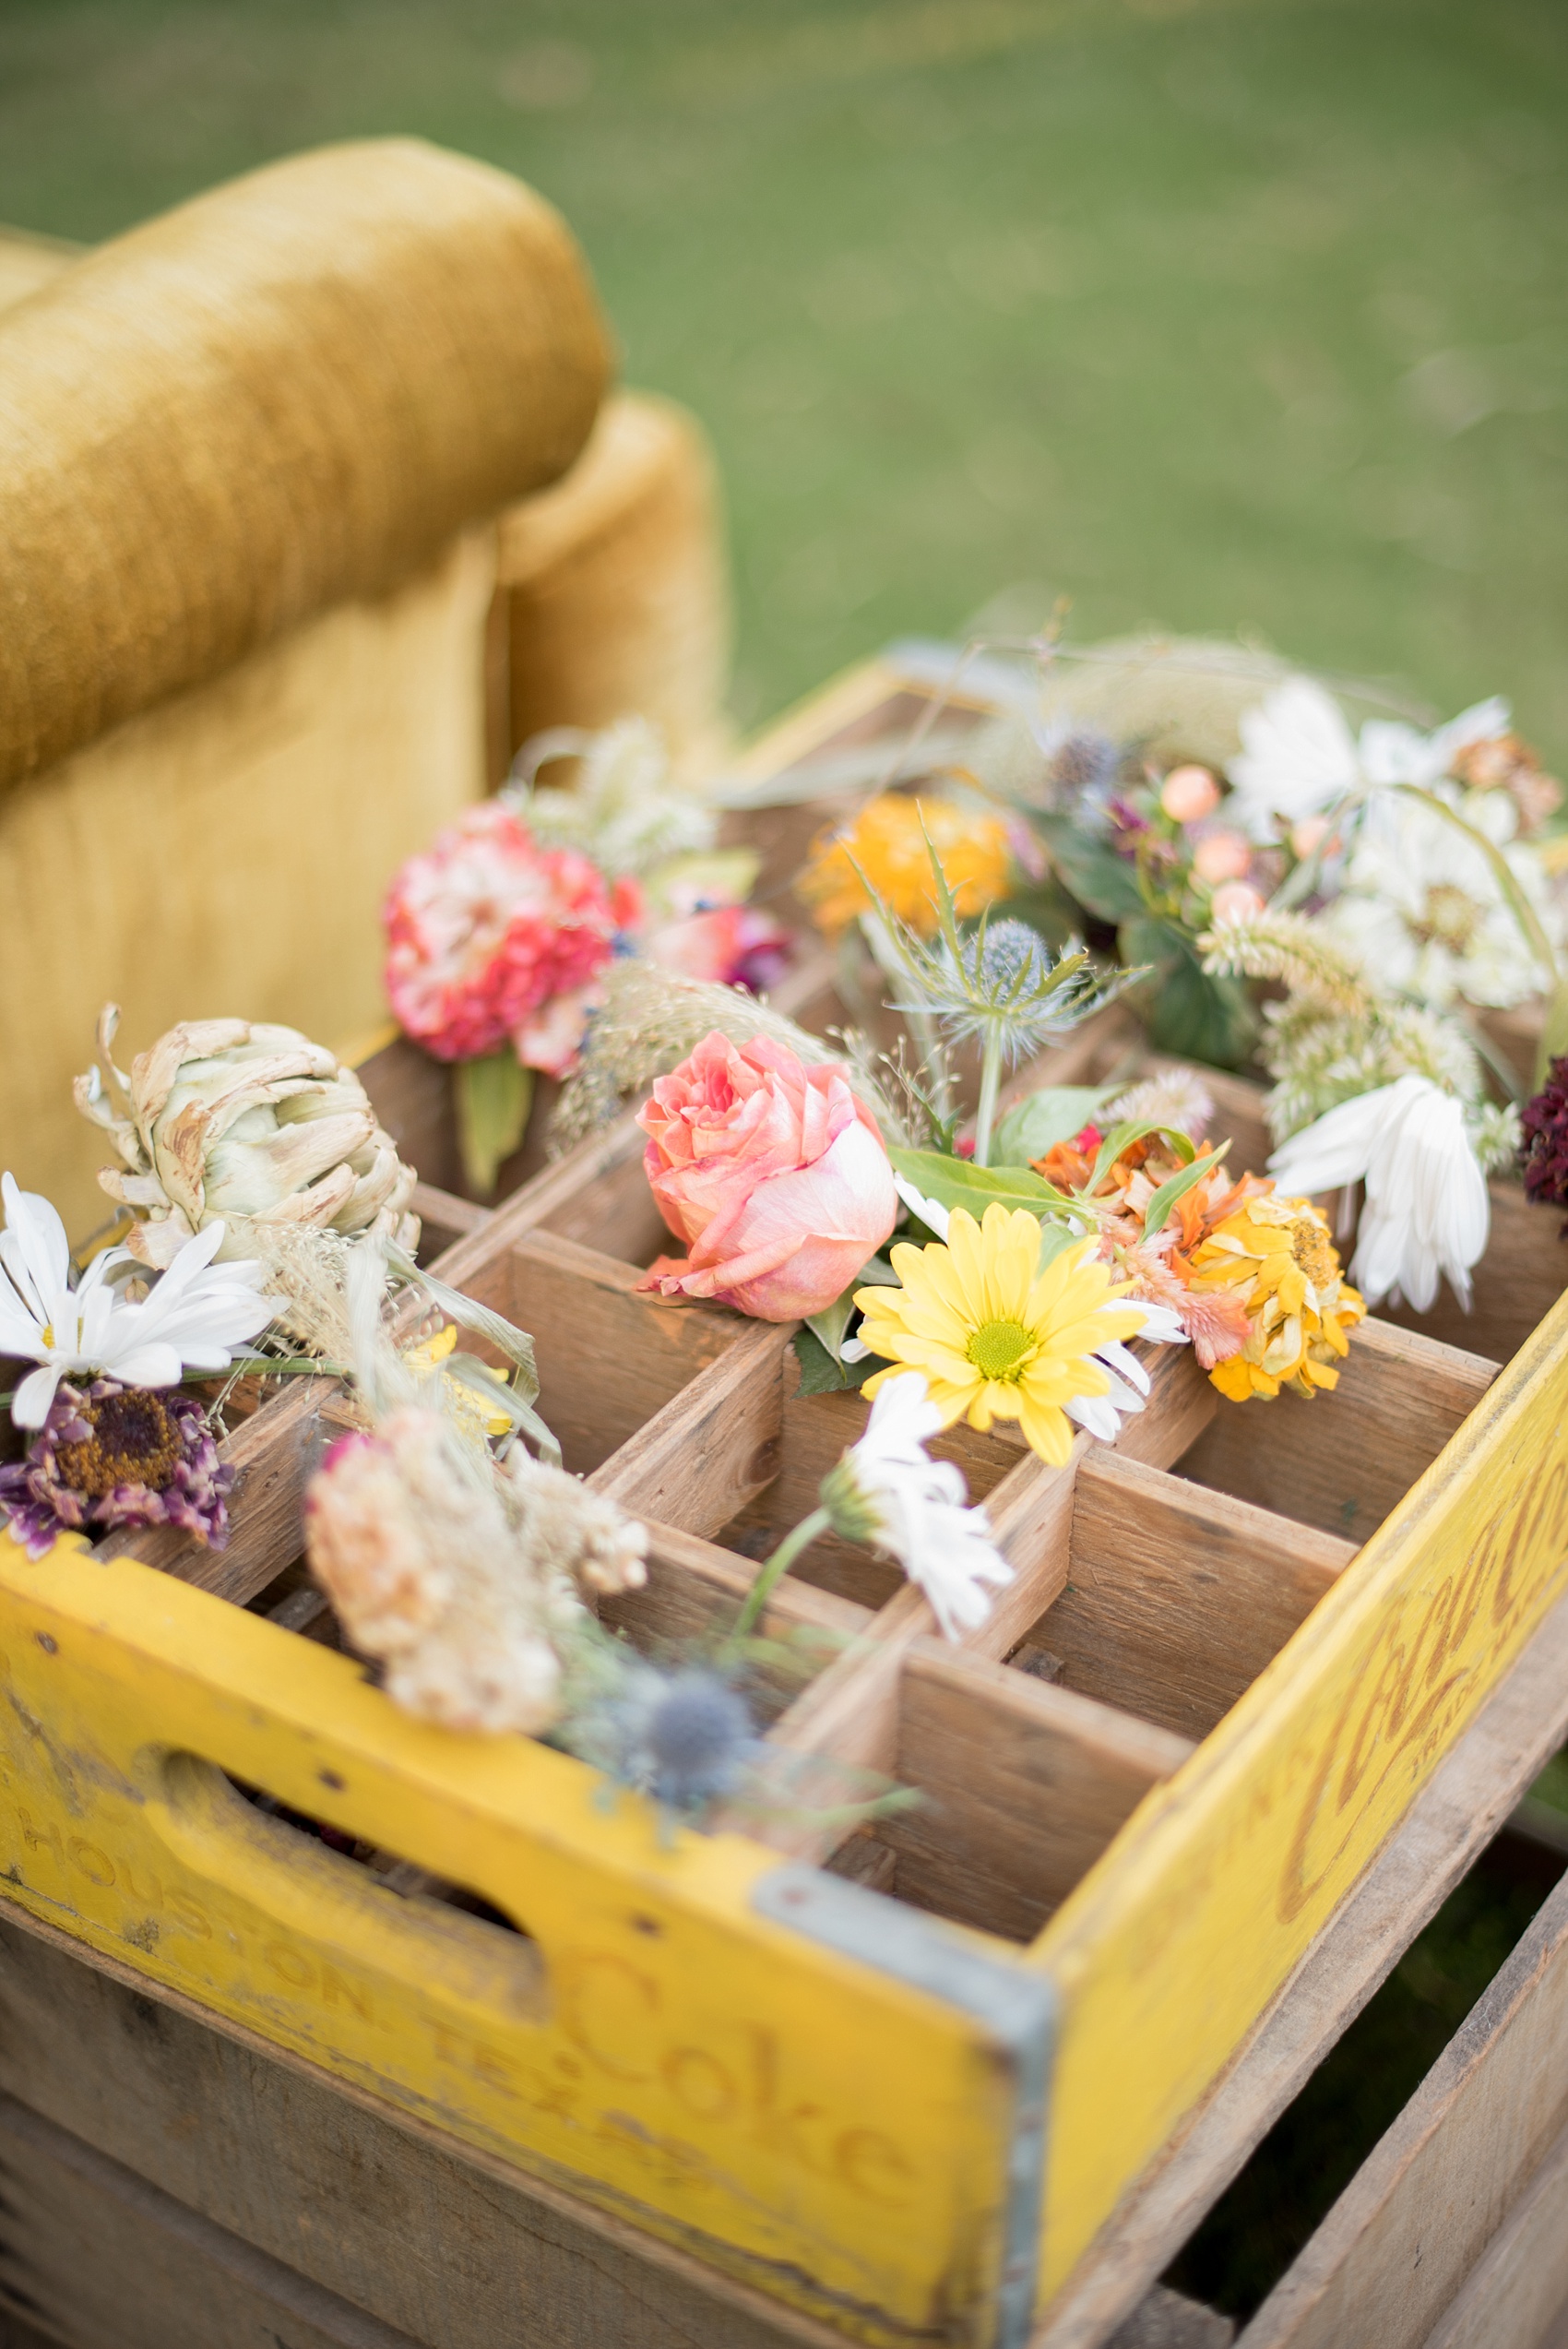 Mikkel Paige Photography photo of Moroccan themed party with vintage yellow wood Coke box with flowers.